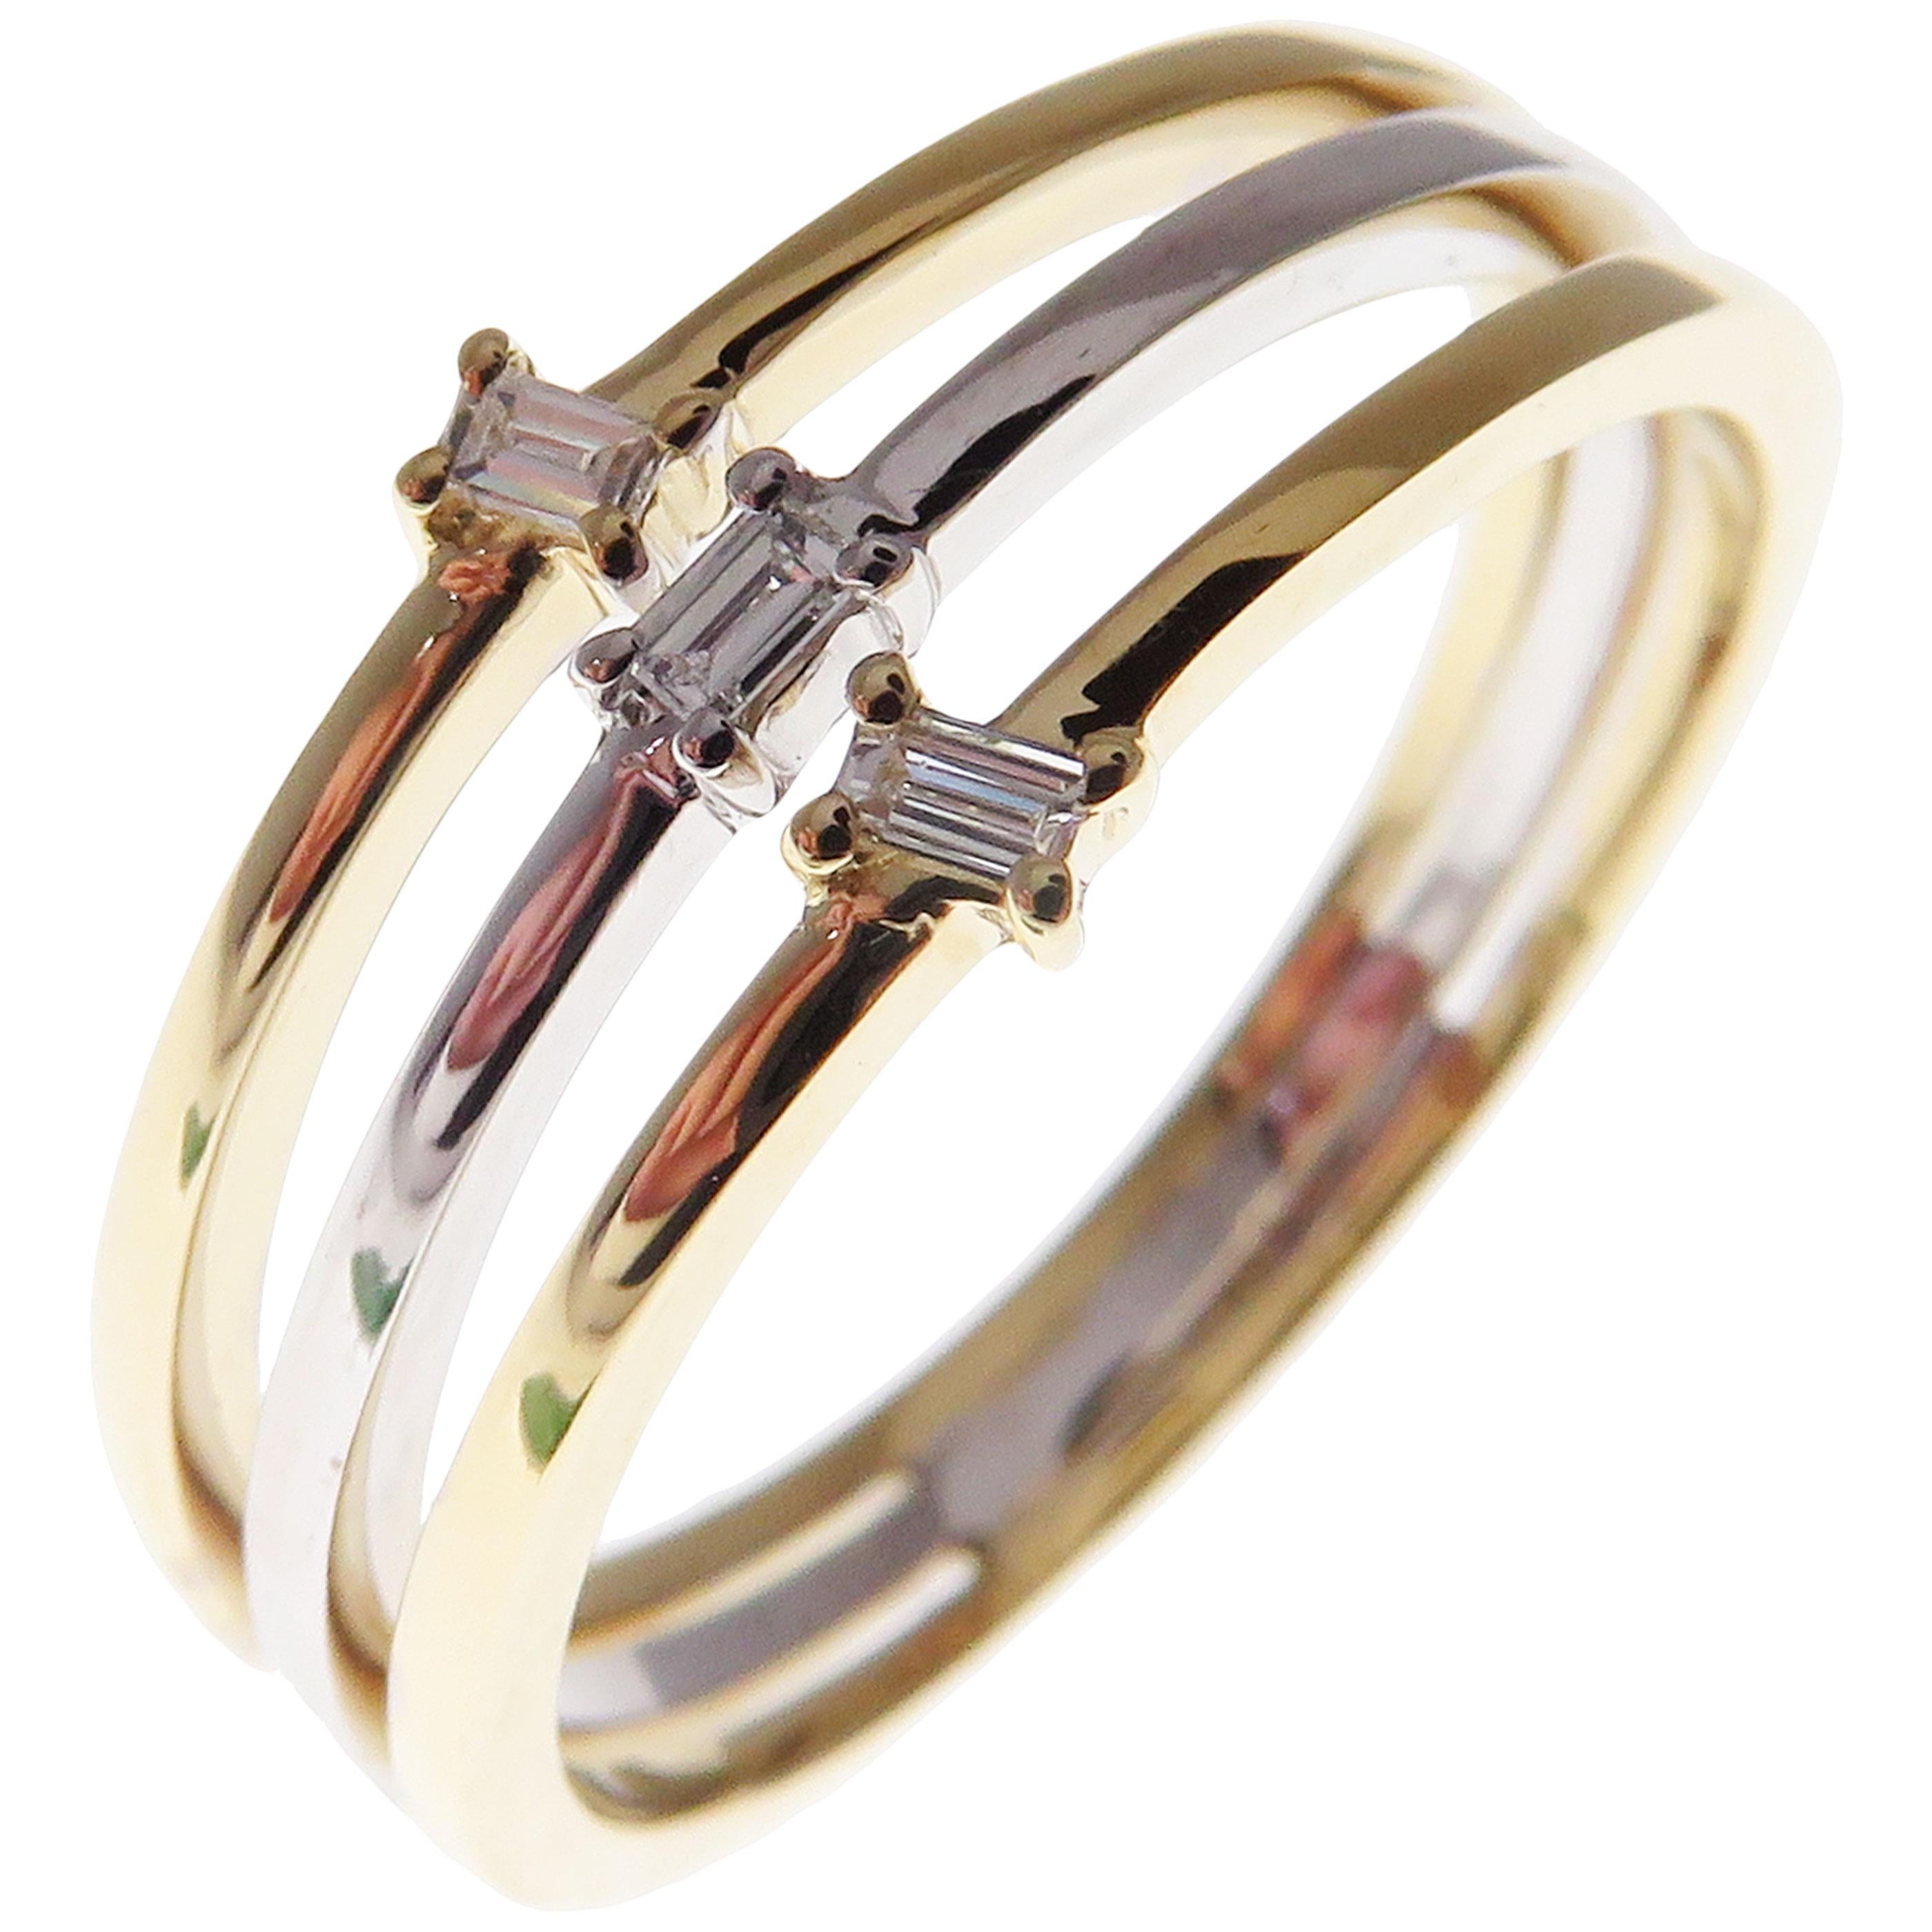 This trendy multi-layer ring is crafted in 18-karat two tone white gold and yellow gold, featuring 3 baguette white diamonds totaling of 0.08 carats.
Approximate total weight 3.34 grams.
Standard Ring size 7
SI-G Quality natural white diamonds.